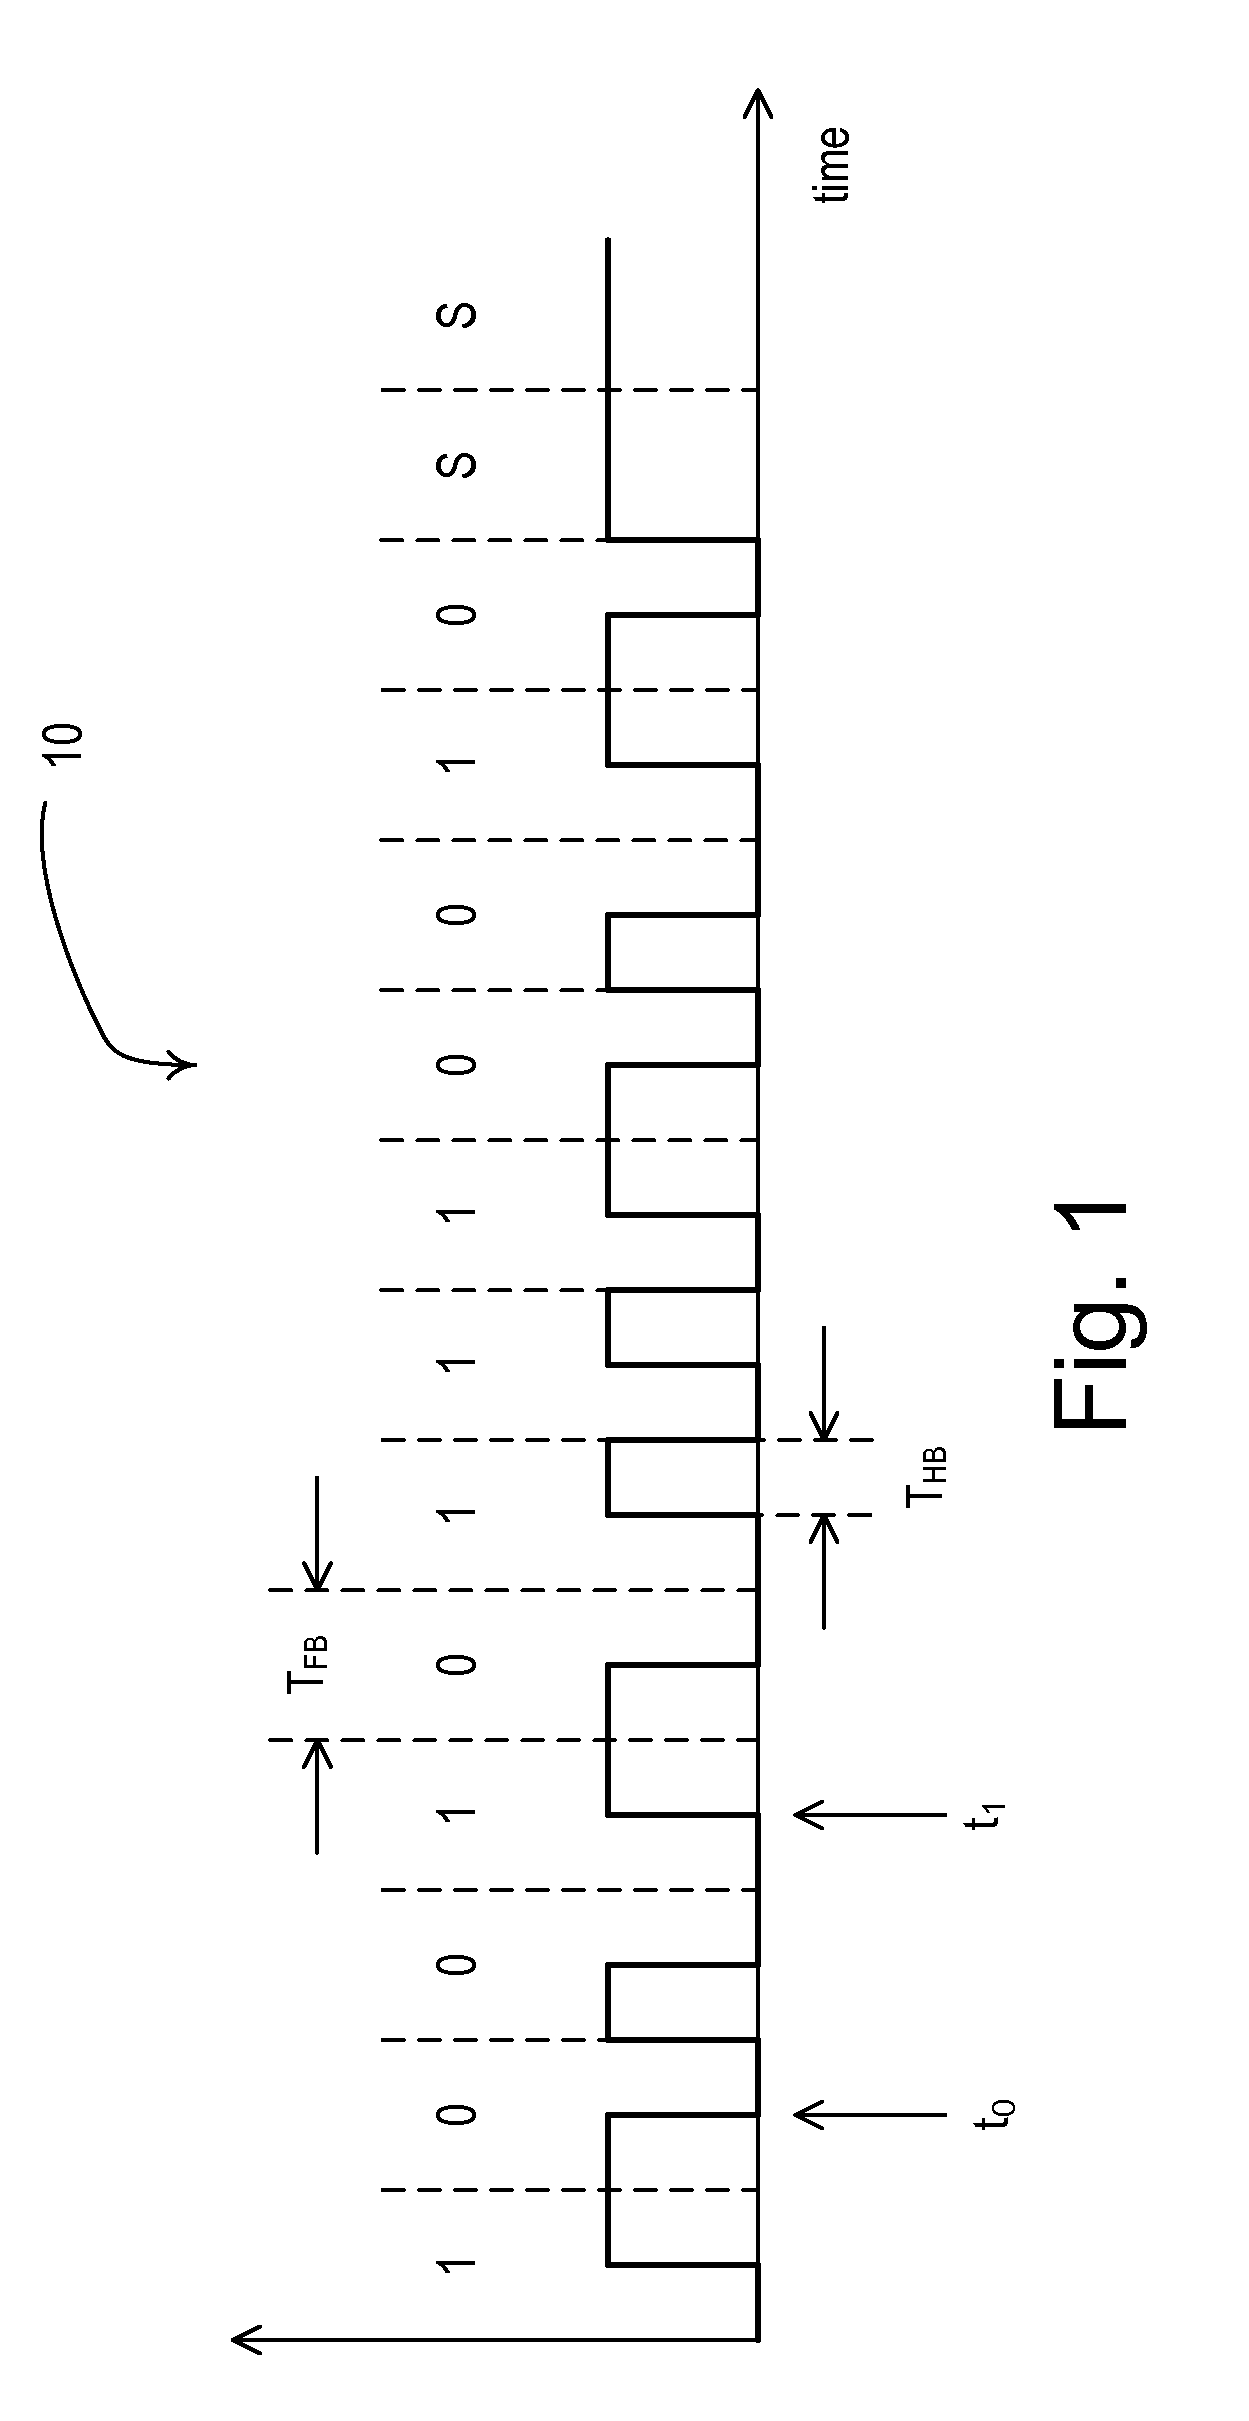 Method of Confirming that a Control Device Complies with a Predefined Protocol Standard